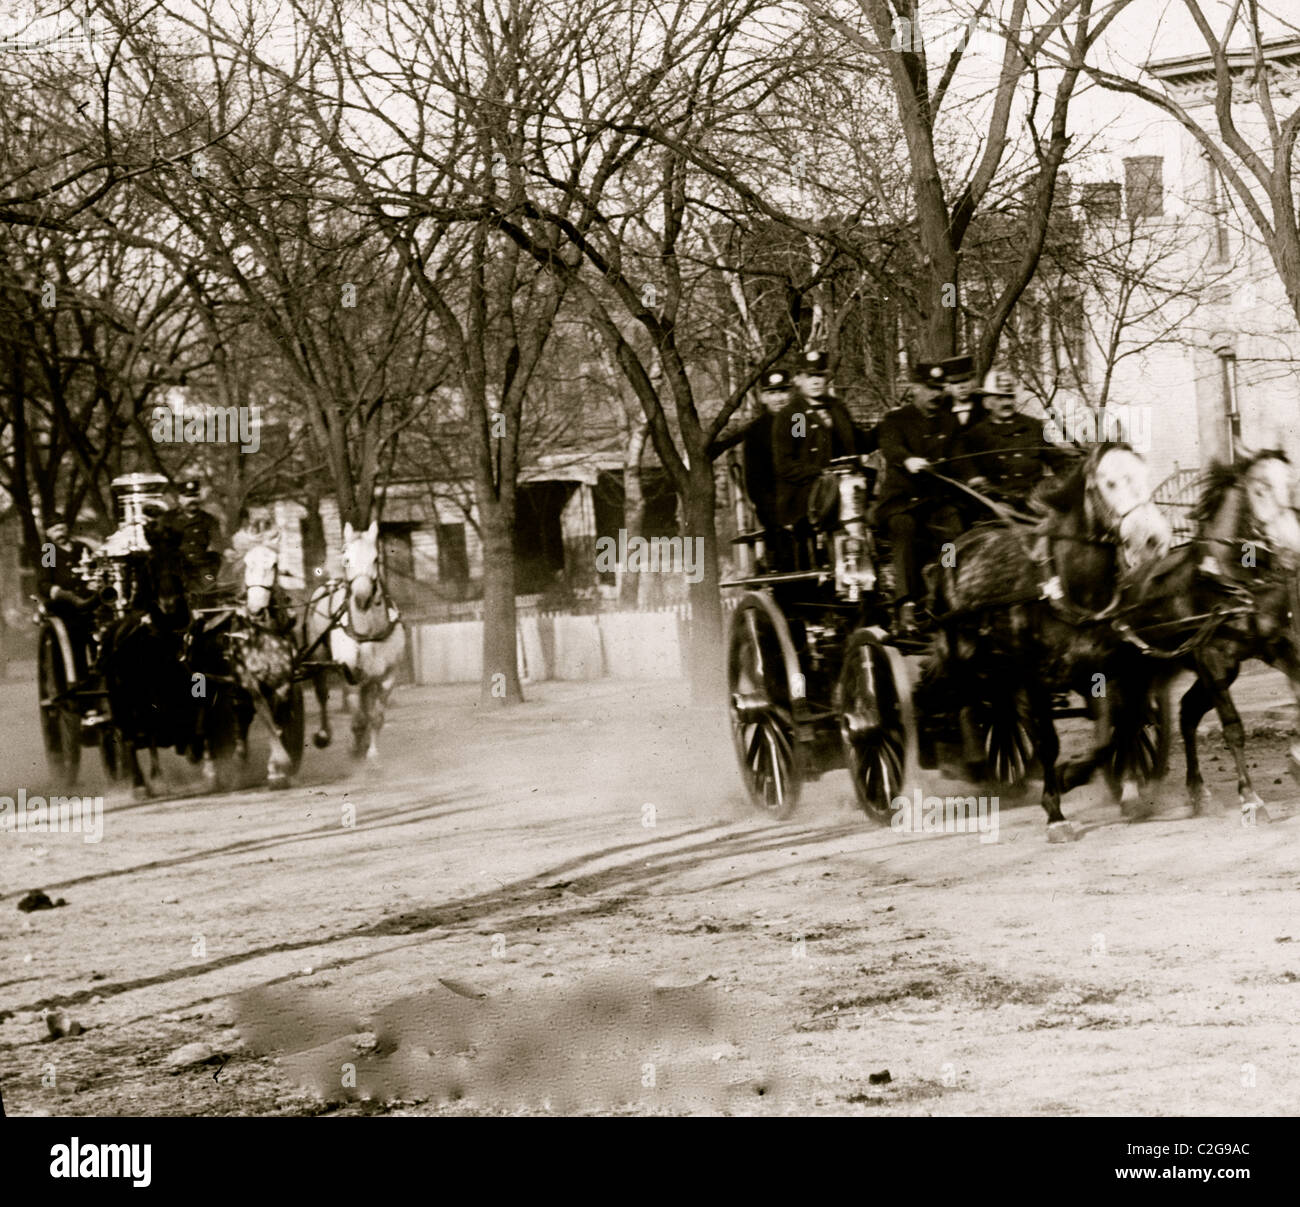 Baltimore fire, 1904] No. 3 D.C. Fire Dept. going into action Stock Photo